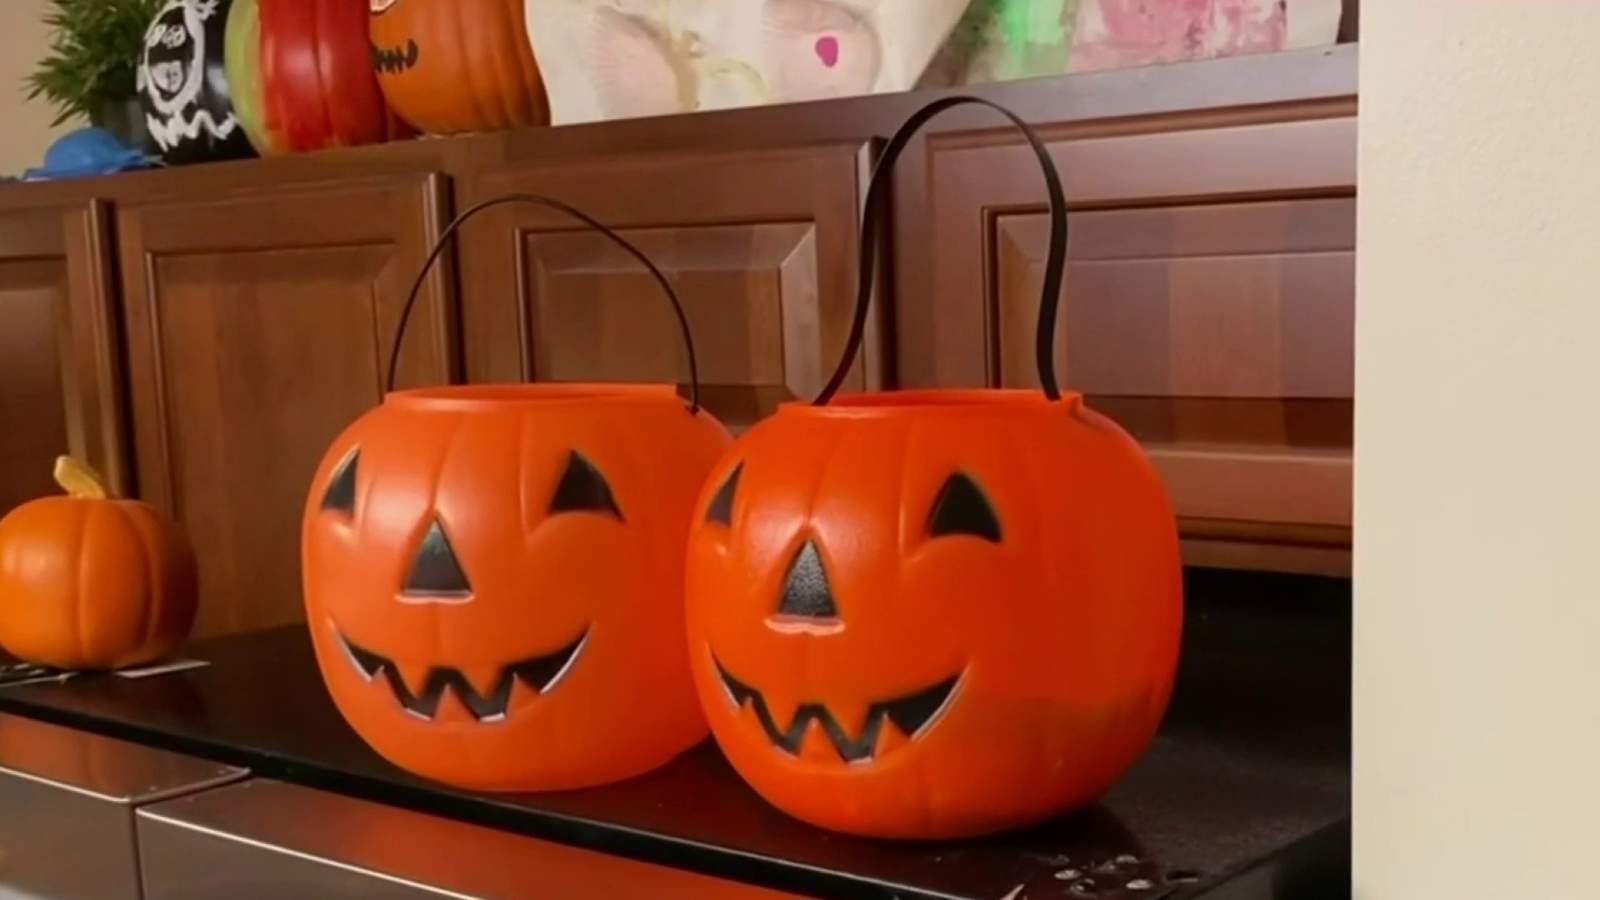 From costumes to candy: Here are some tips for having a safe Halloween amid COVID pandemic